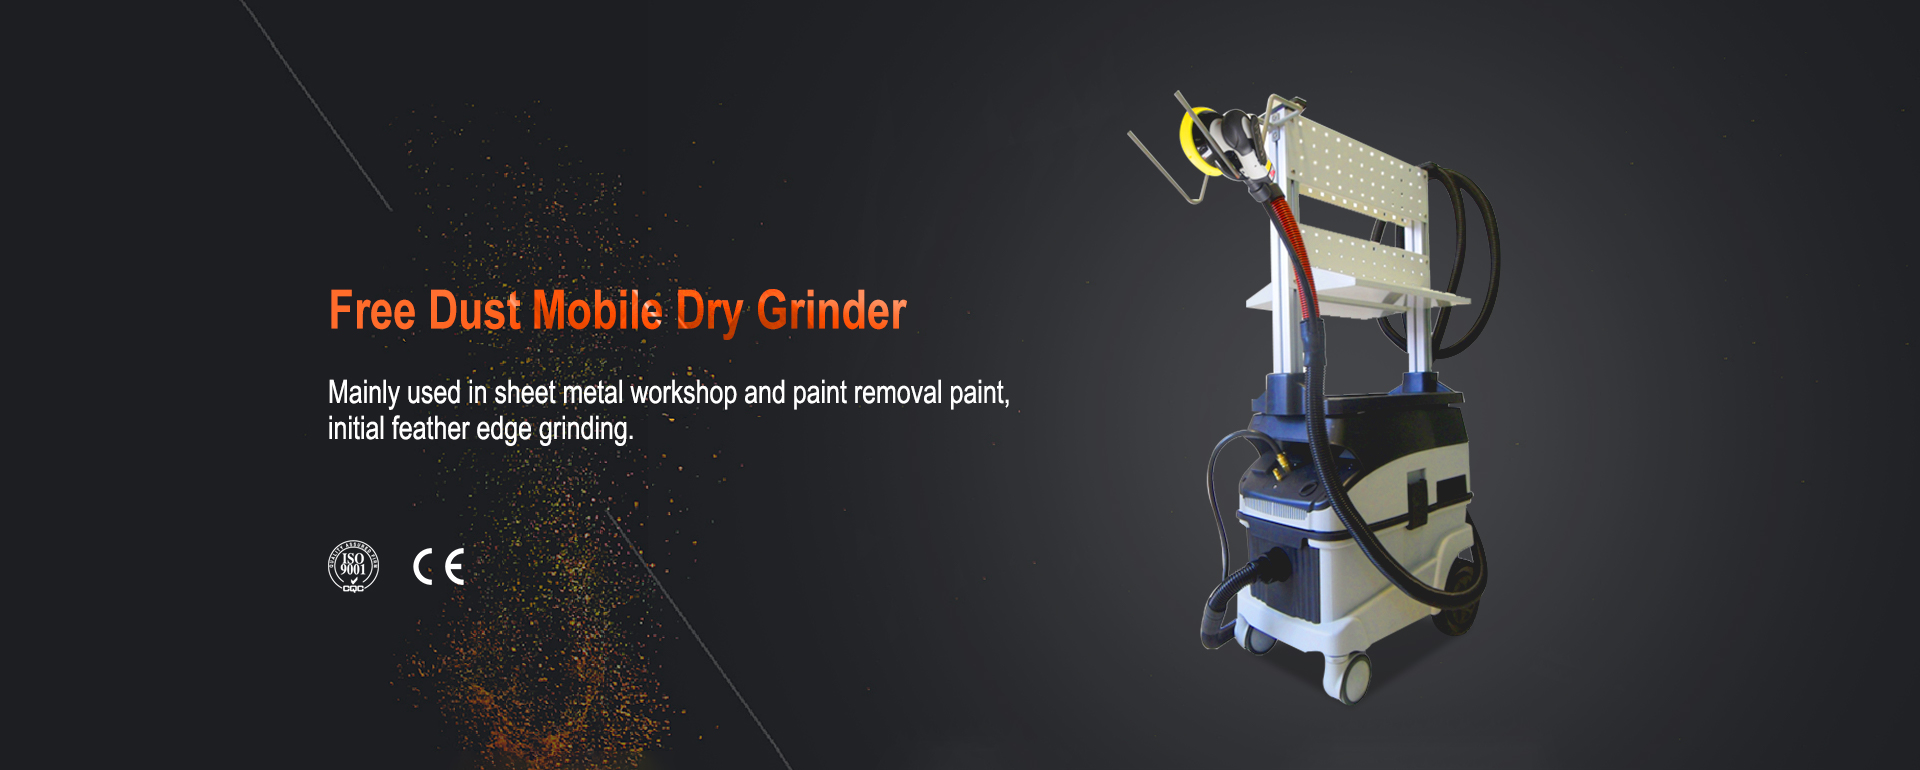 XYS Free Dust Mobile Dry Grinder